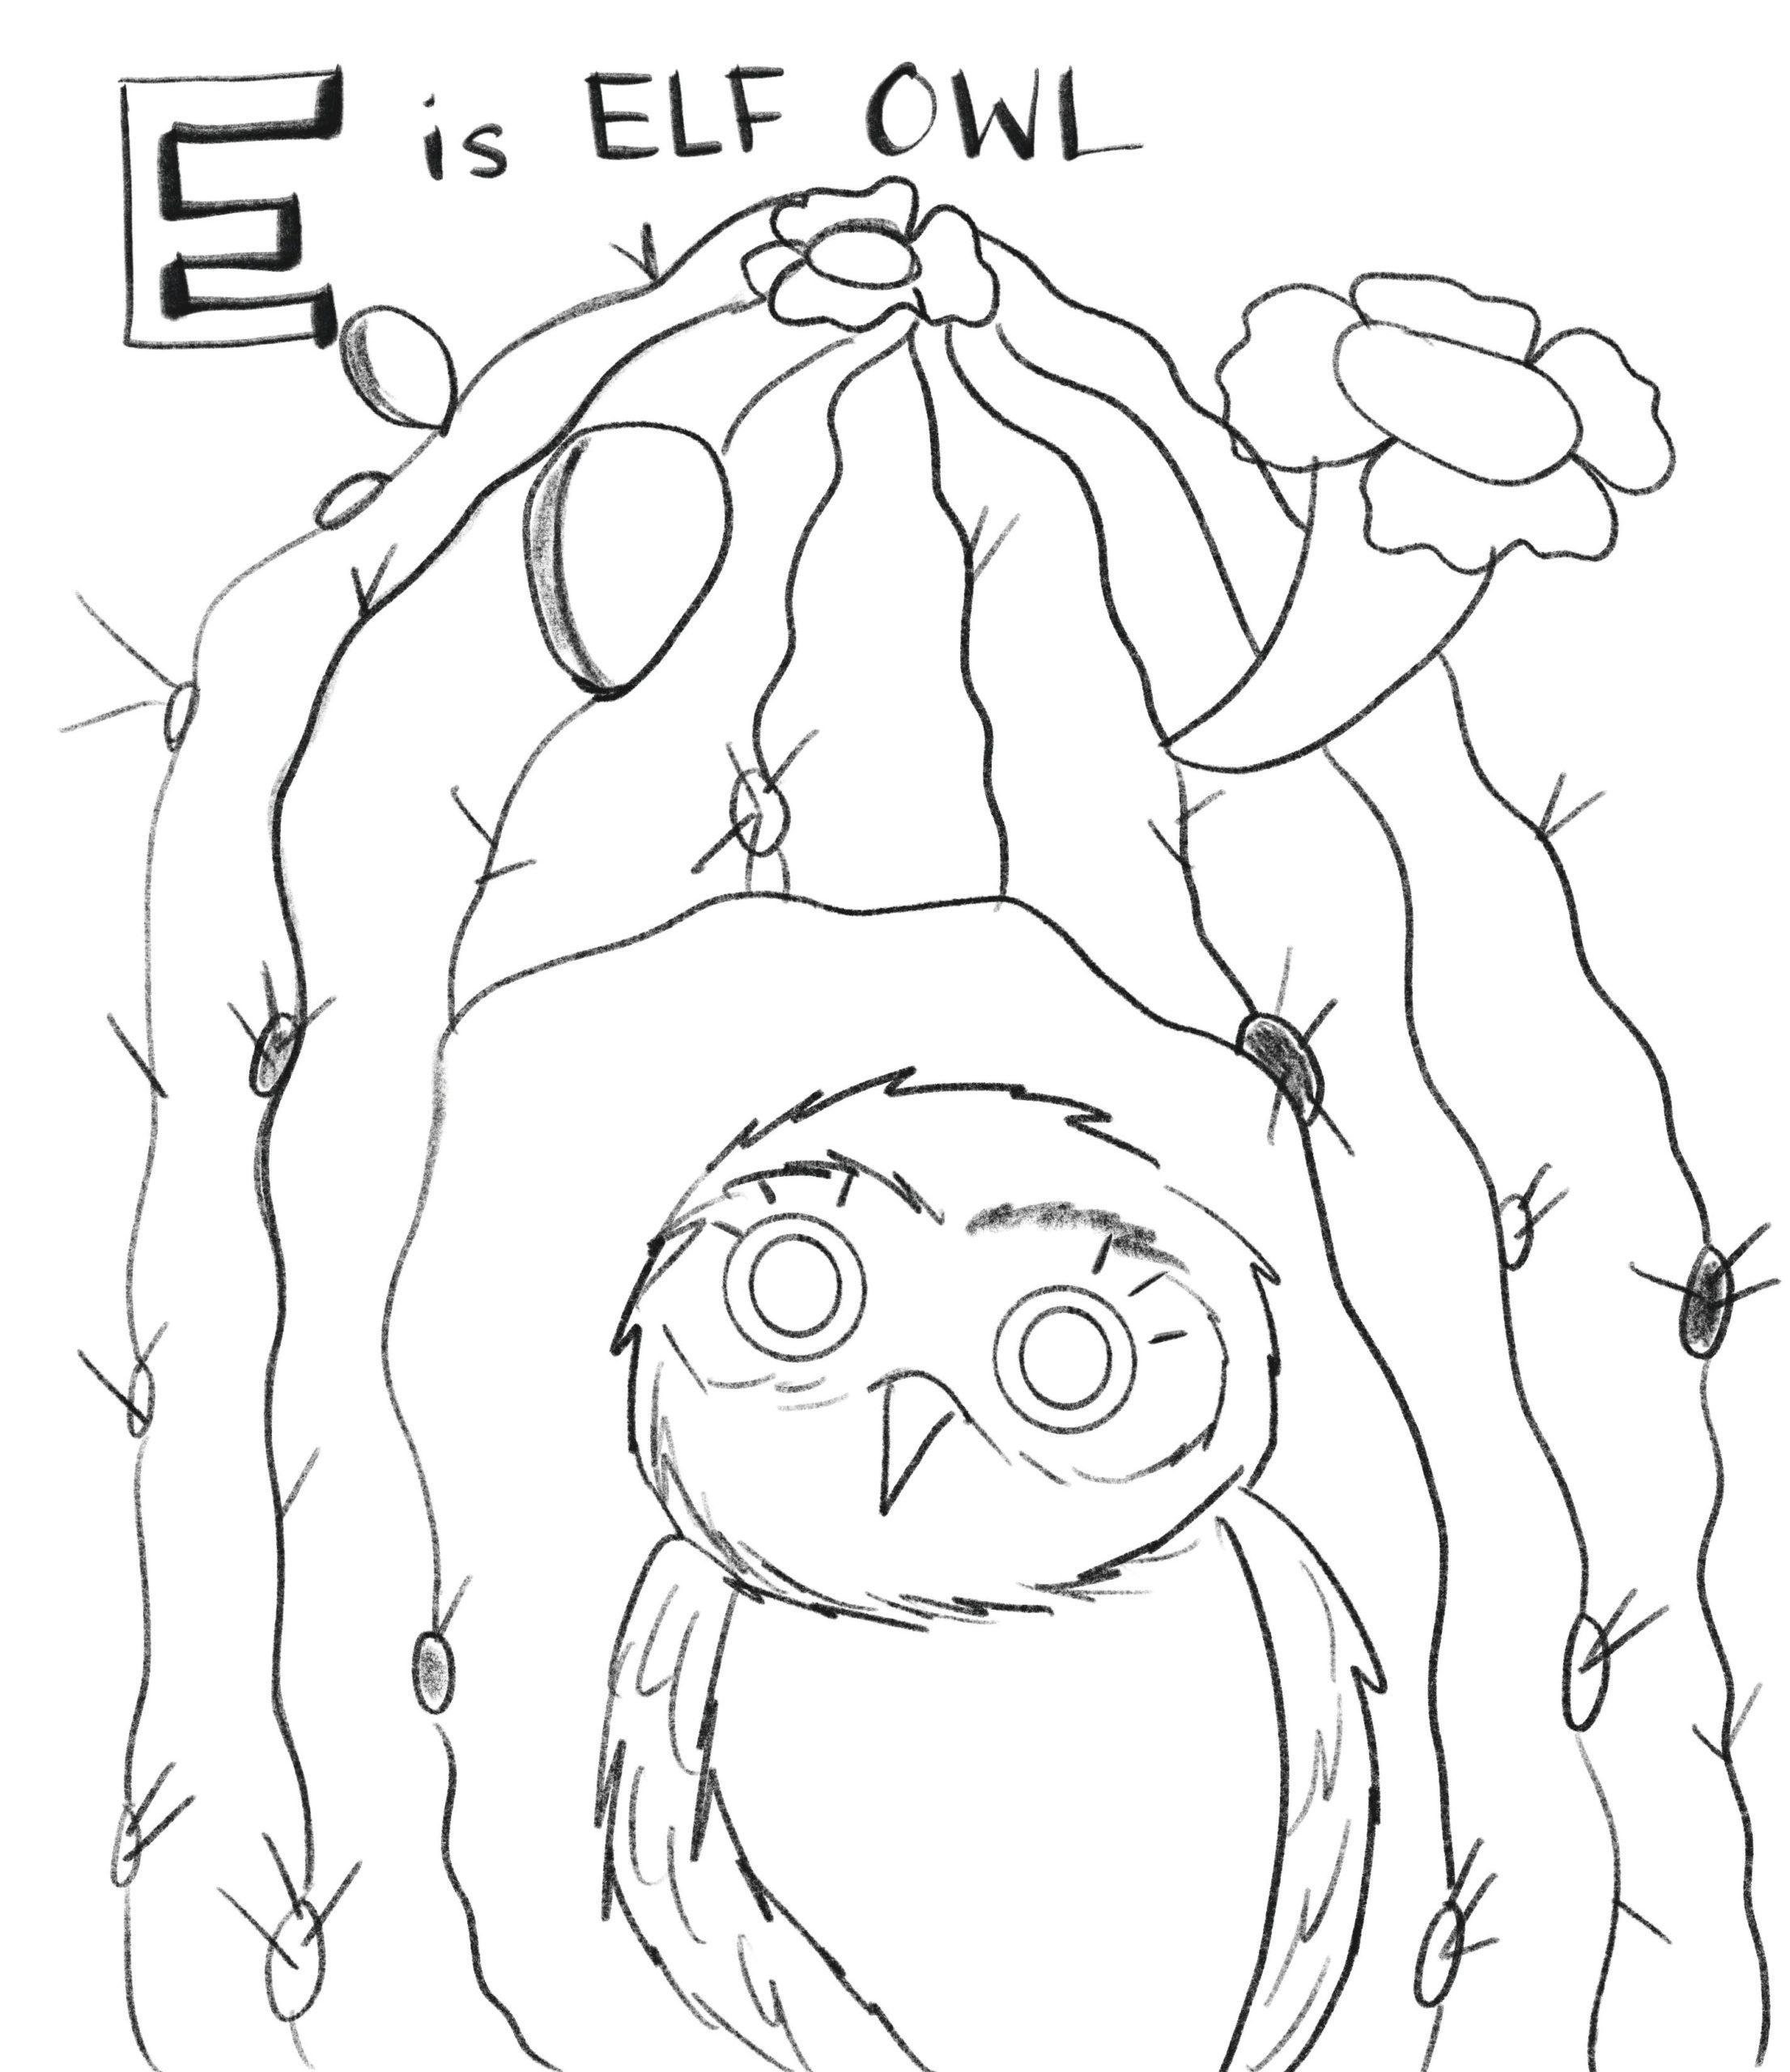 E is Elf Owl - drawing to color in by Aimee Haburjak